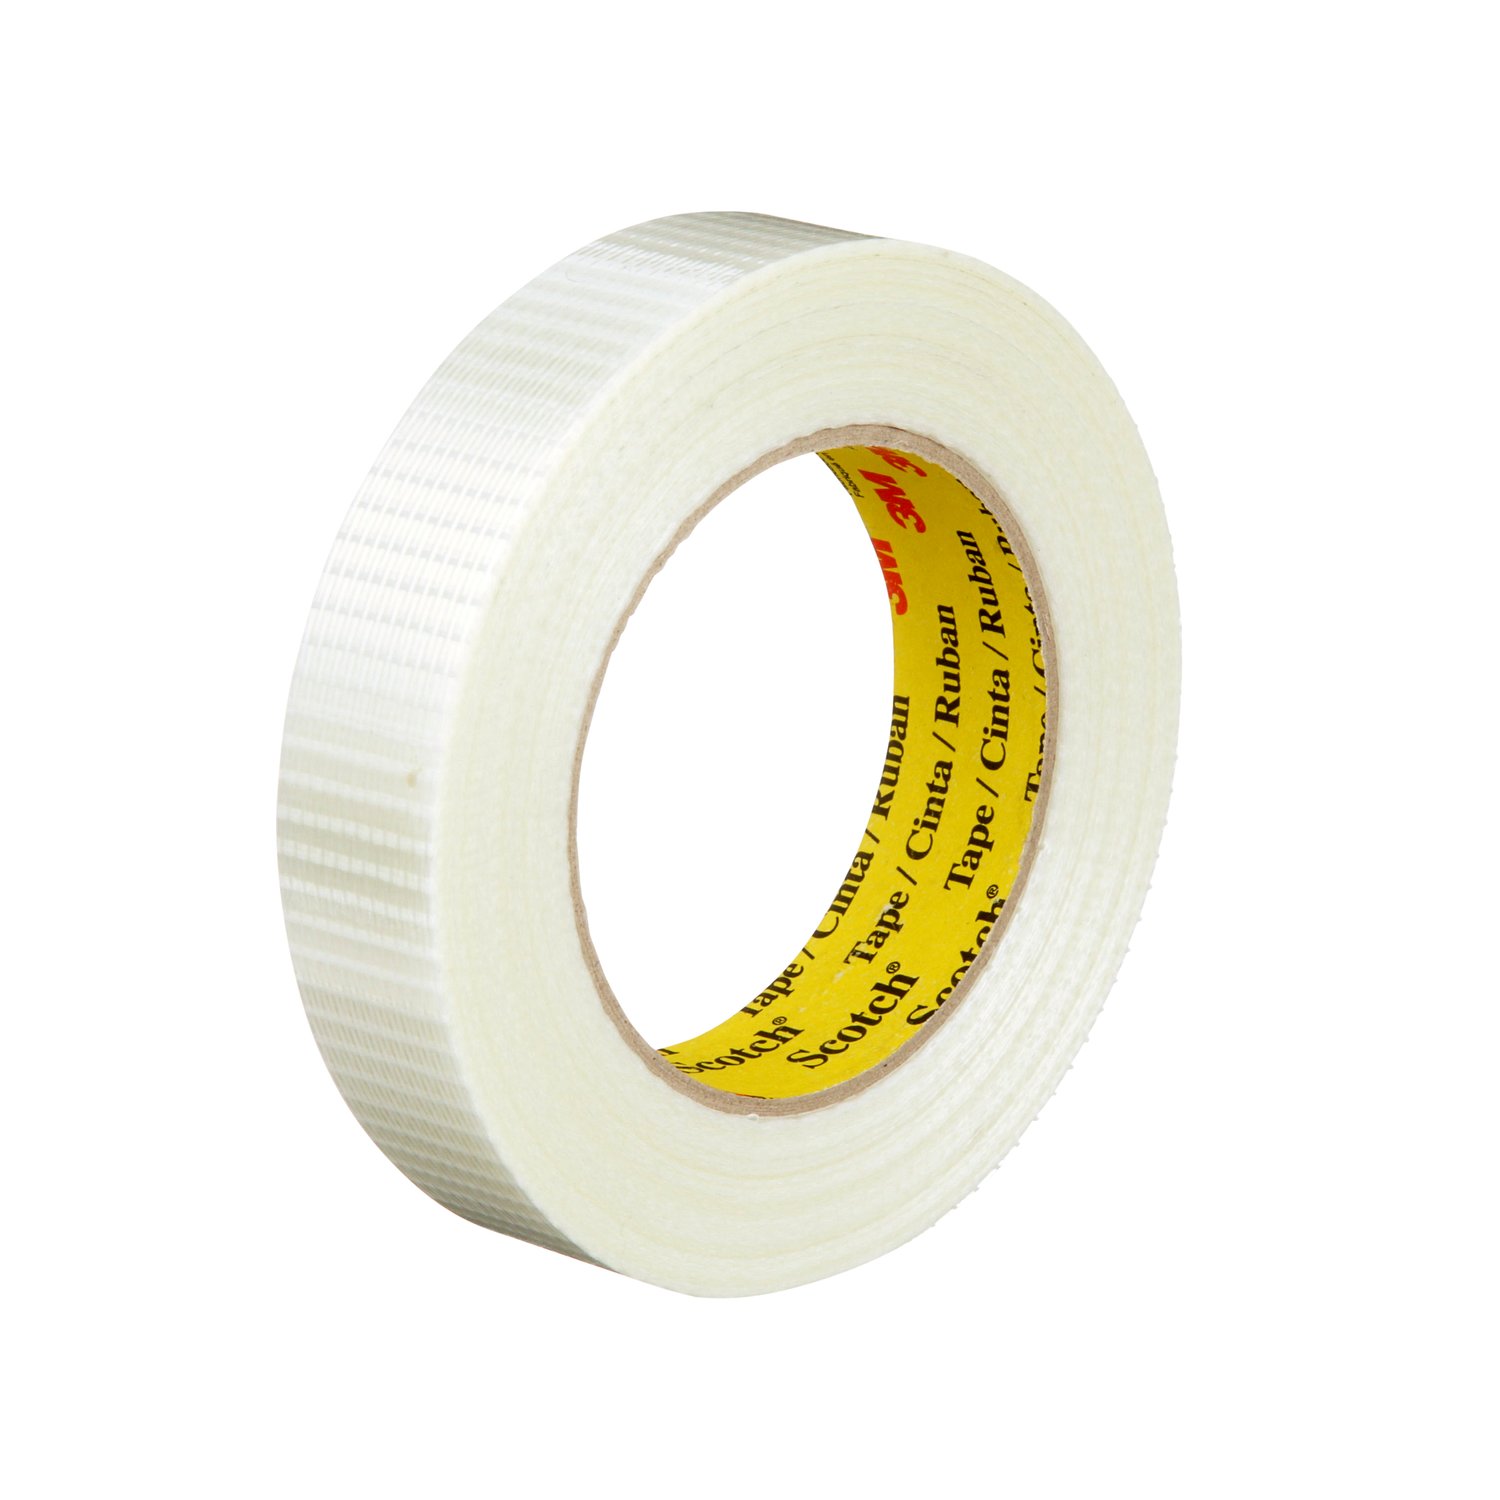 Scotch Double Sided Removable Tape, 1/2 in x 300 in (2002-CFT)